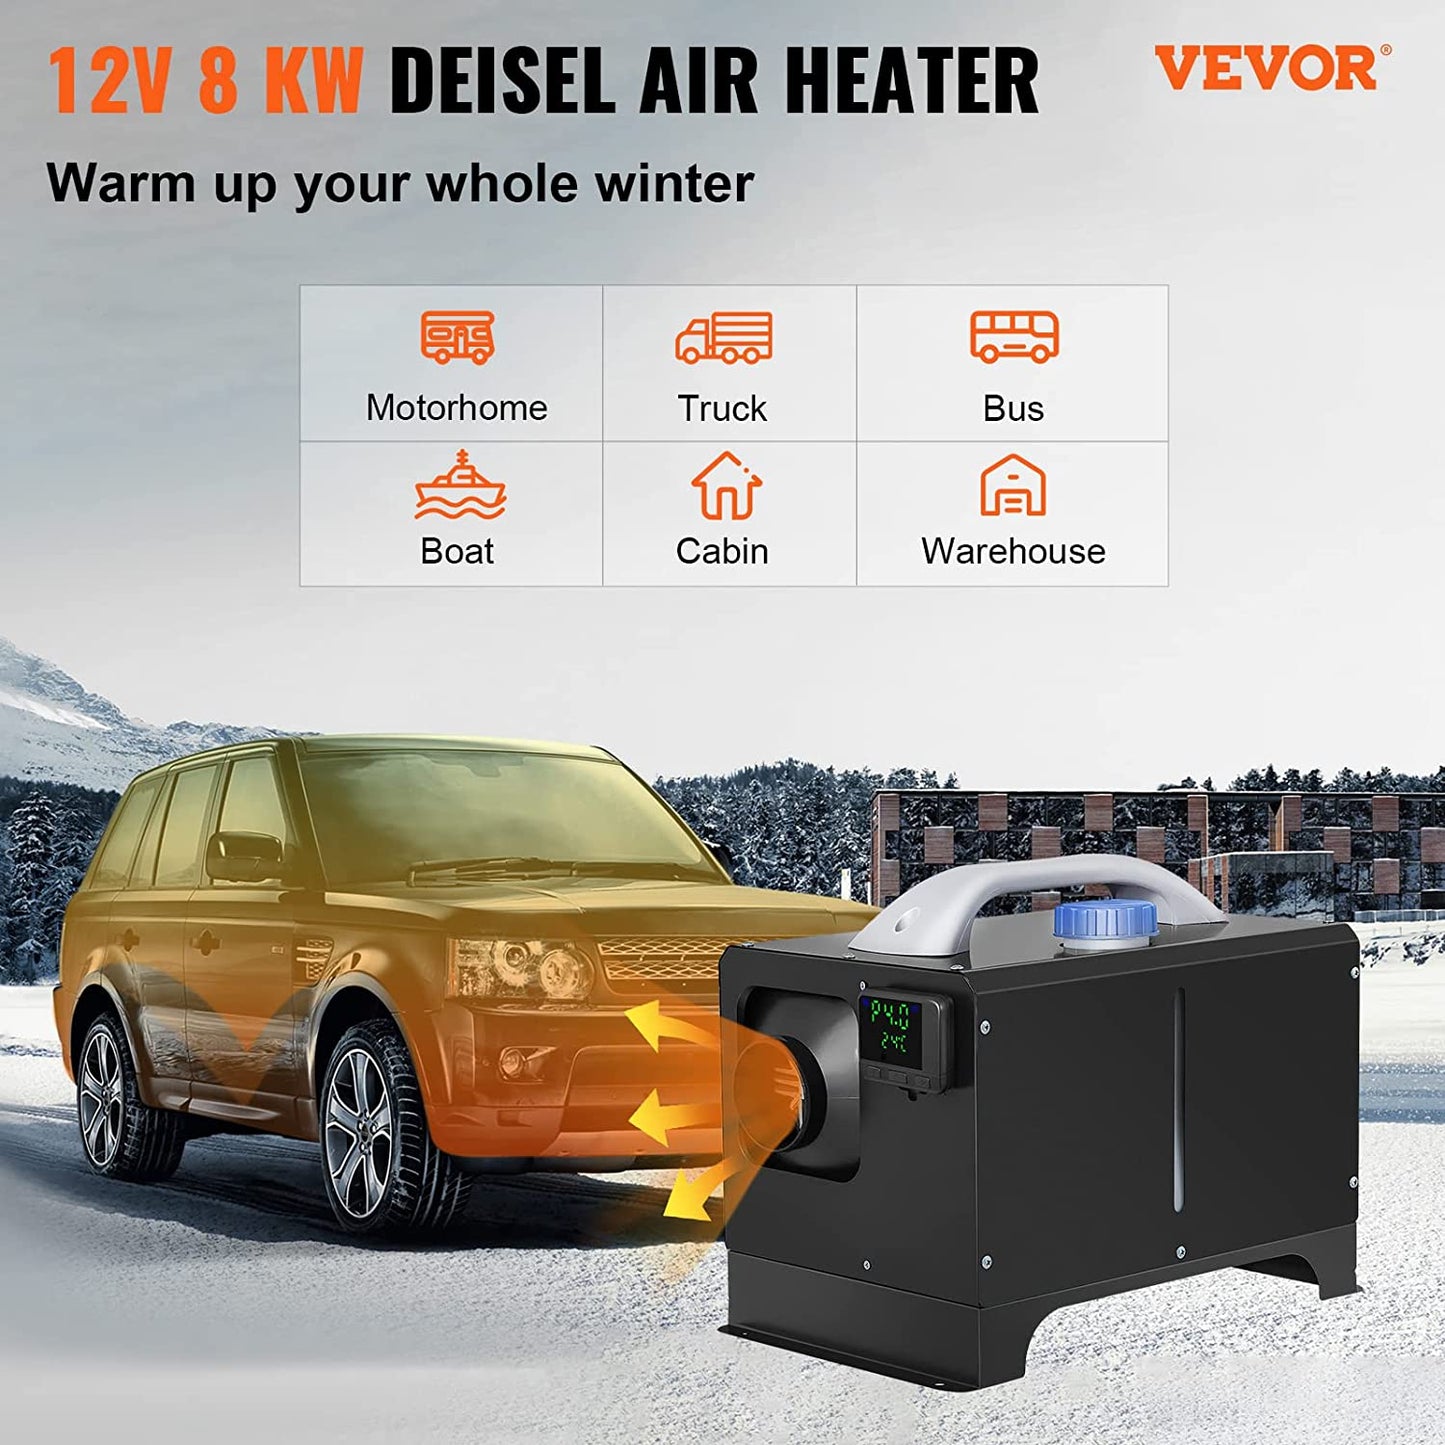 Diesel Air Heater 8KW, All in One 12V Truck Heater, Parking Heater with Black LCD, Remote Control, Fast Heating Diesel Heater for RV Truck, Boat, Bus, Car Trailer, Motorhomes